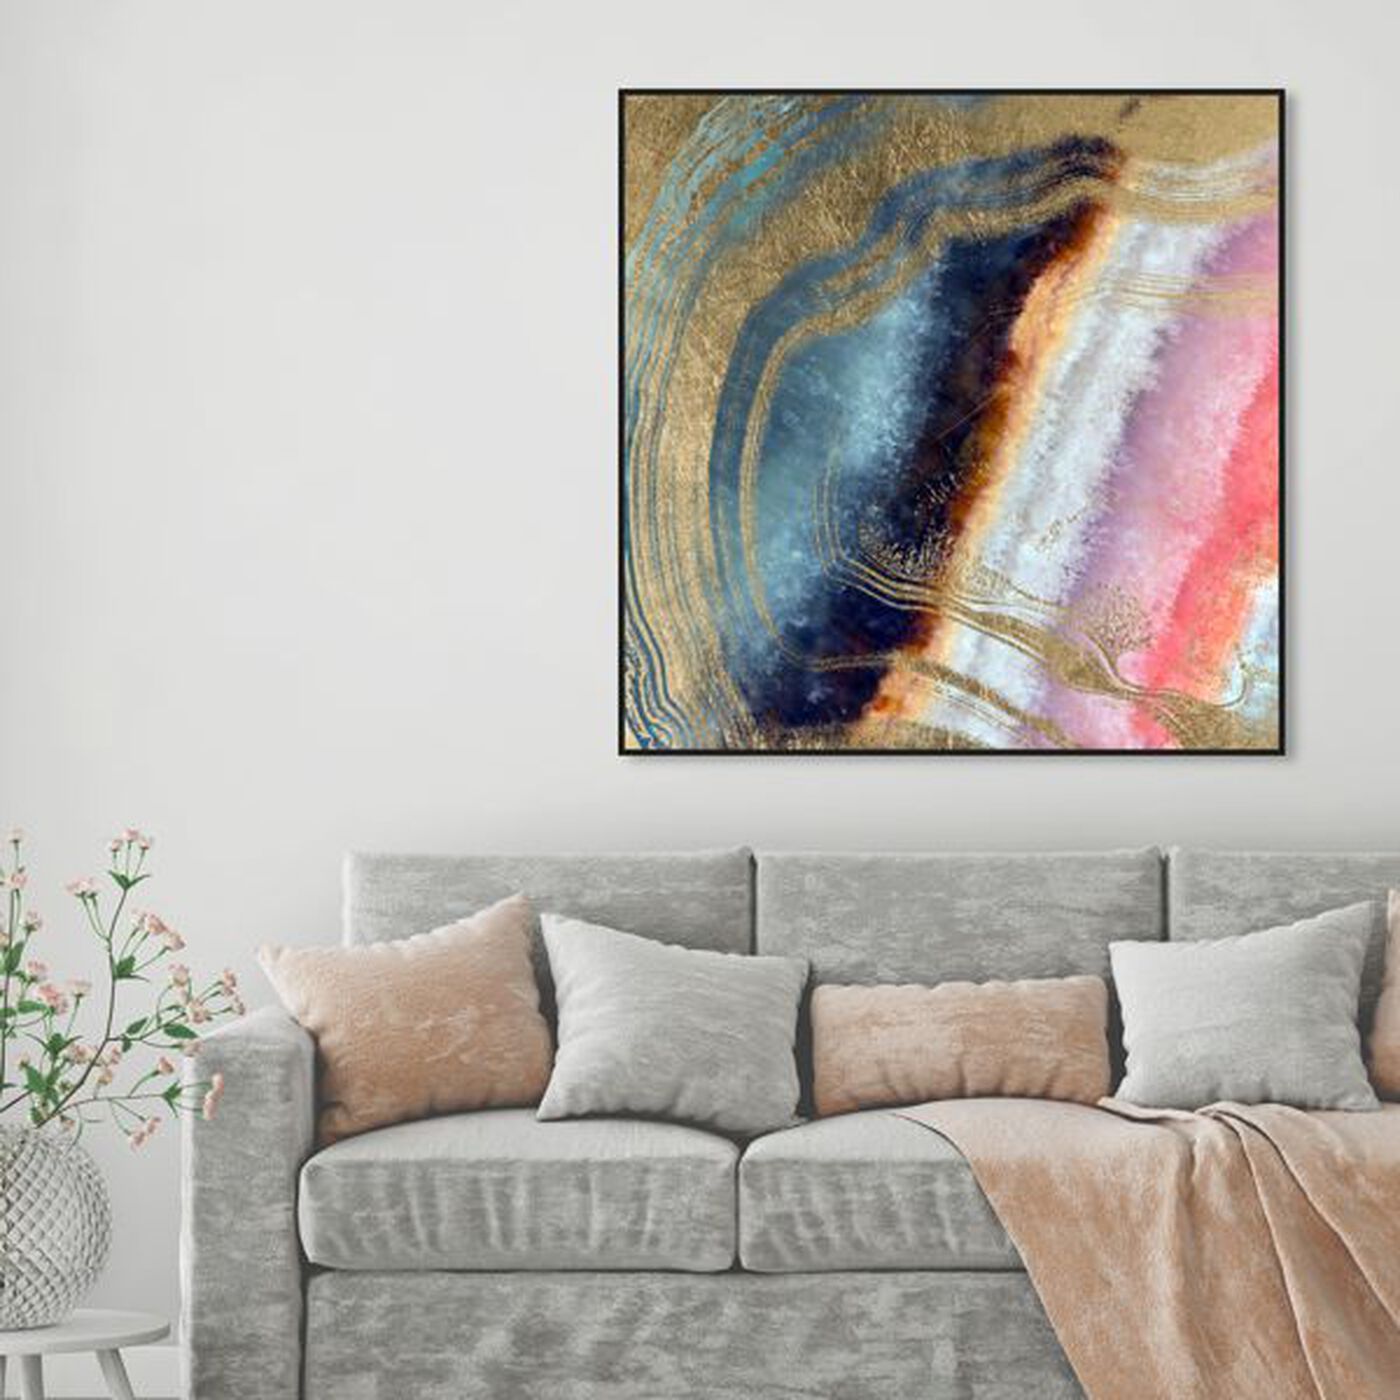 Hanging view of Marianna featuring abstract and crystals art.